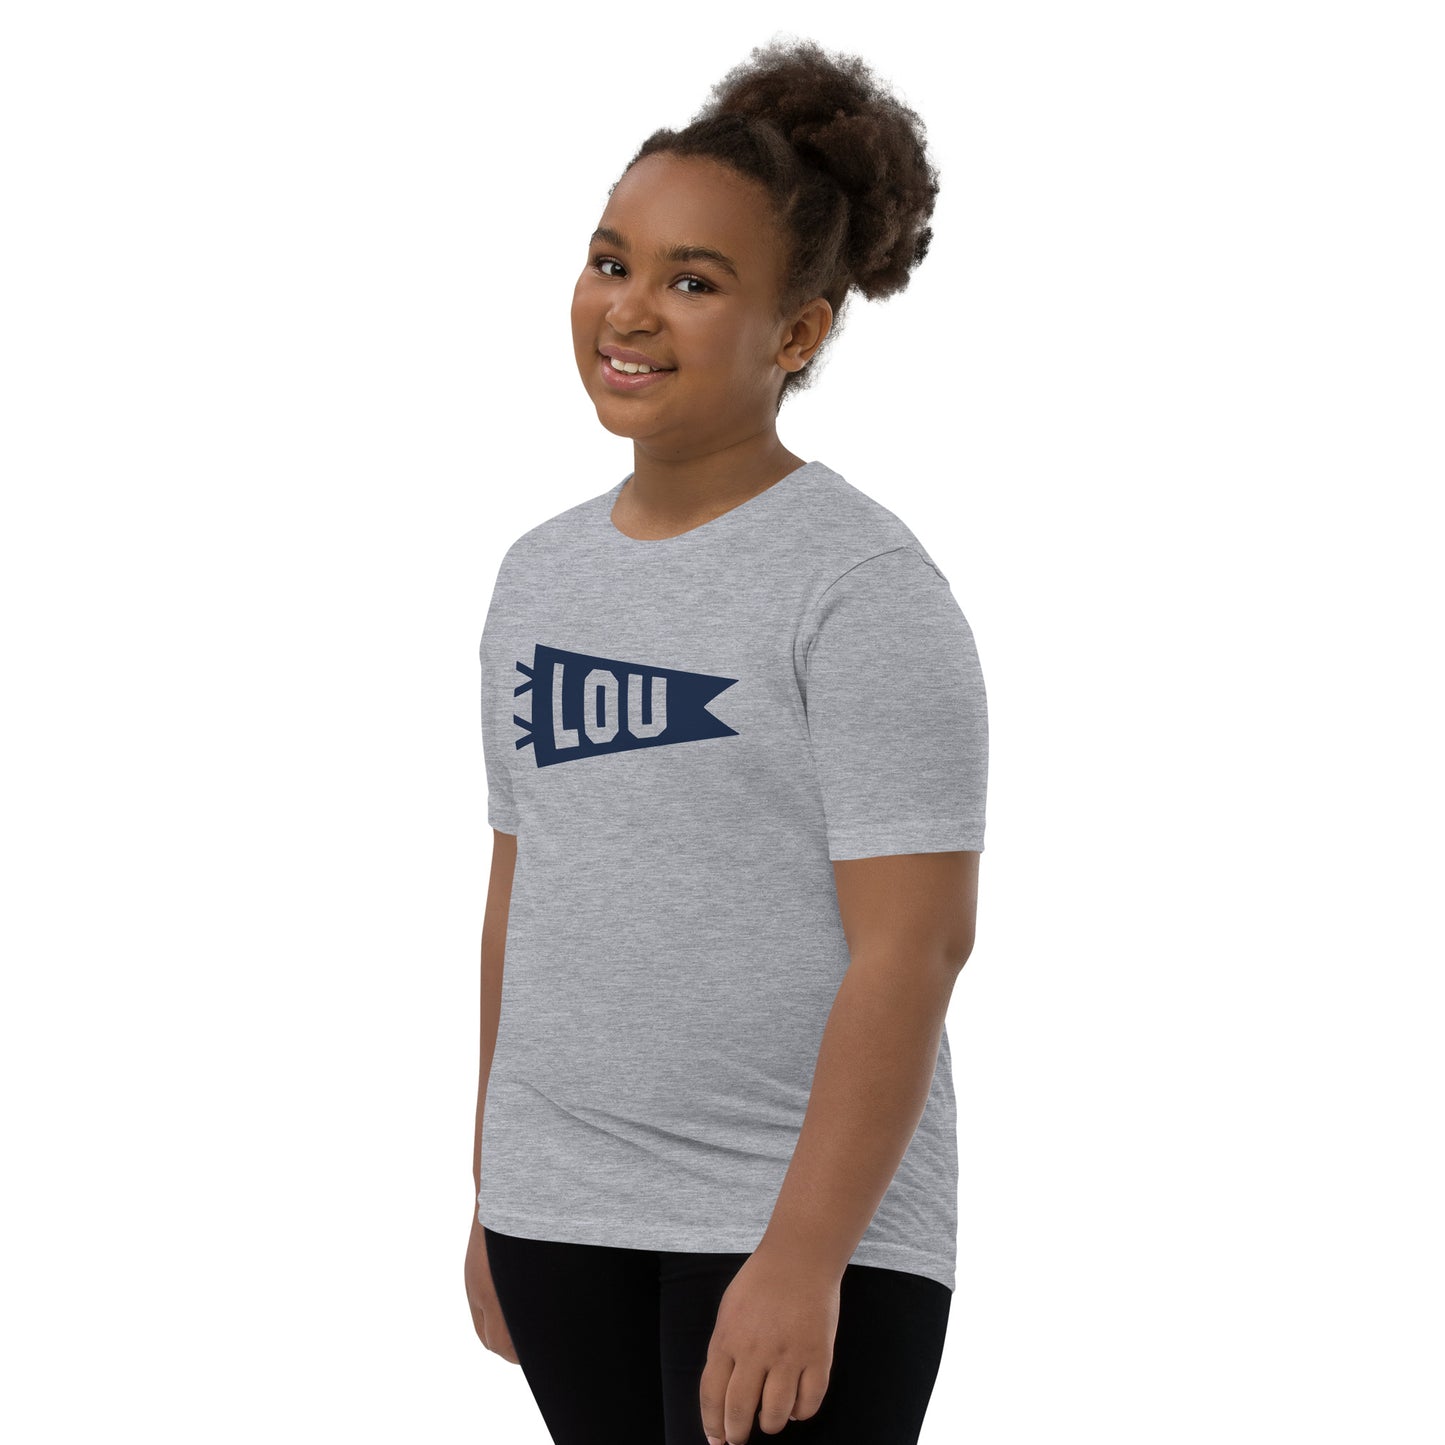 Kid's Airport Code Tee - Navy Blue Graphic • LOU Louisville • YHM Designs - Image 04